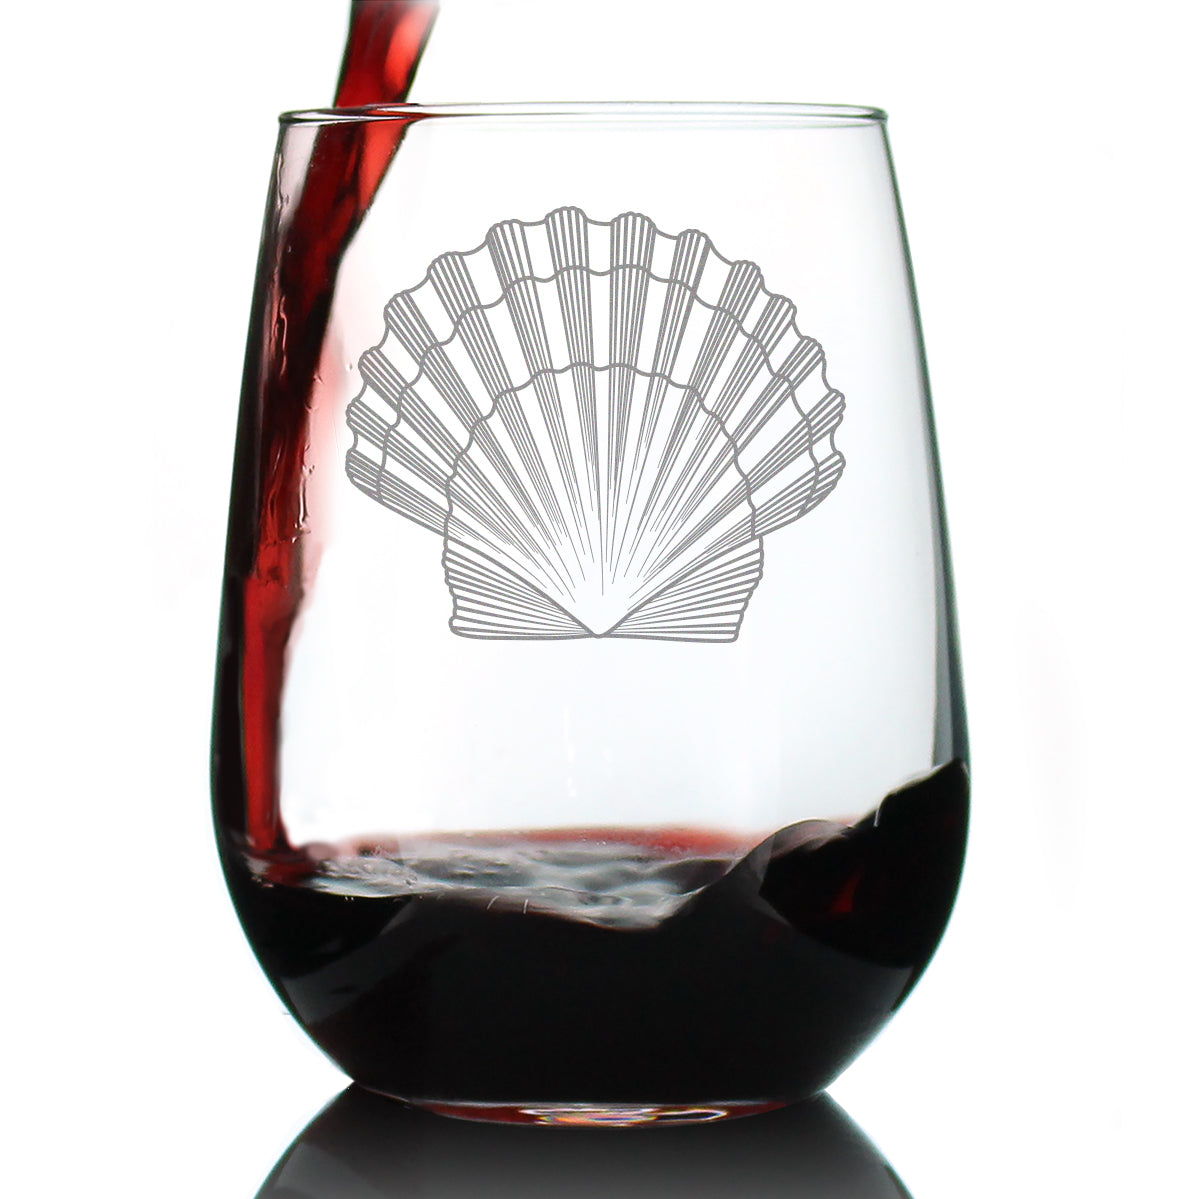 Seashell Engraved Stemless Wine Glass, Unique Decorative Gift for Beach House, Nautical Decor Birthday Gifts with Seashells